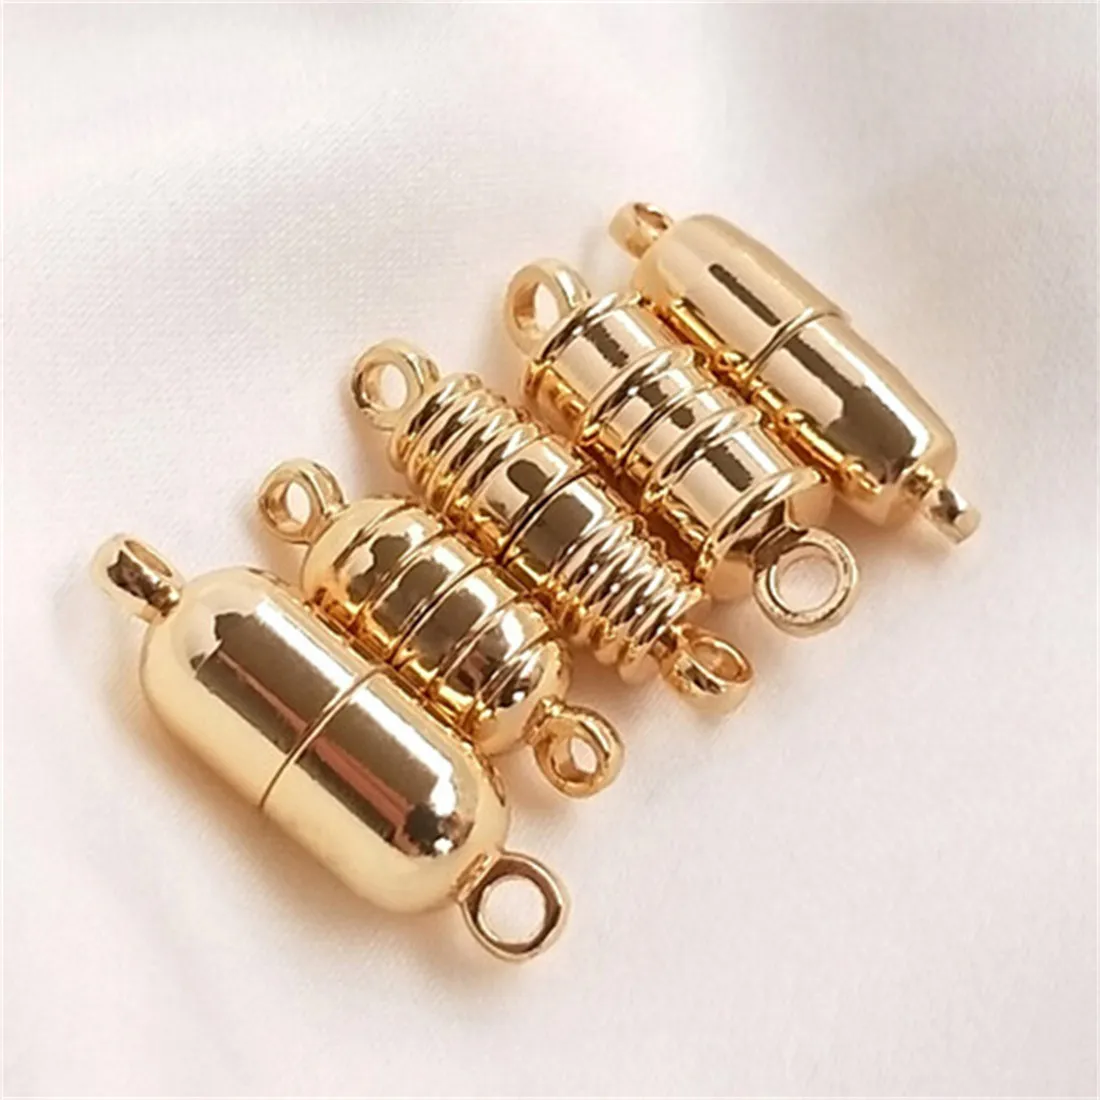 14k Gold Package DIY Accessories Magnetic Buckle Round Bamboo Joint Long Barrel Pill Shaped Bracelet Necklace Suction Iron Buckl mk10 extruder 1 75 consumables m7 thread throat tube barrel for makerbot reprap 3d printer accessories